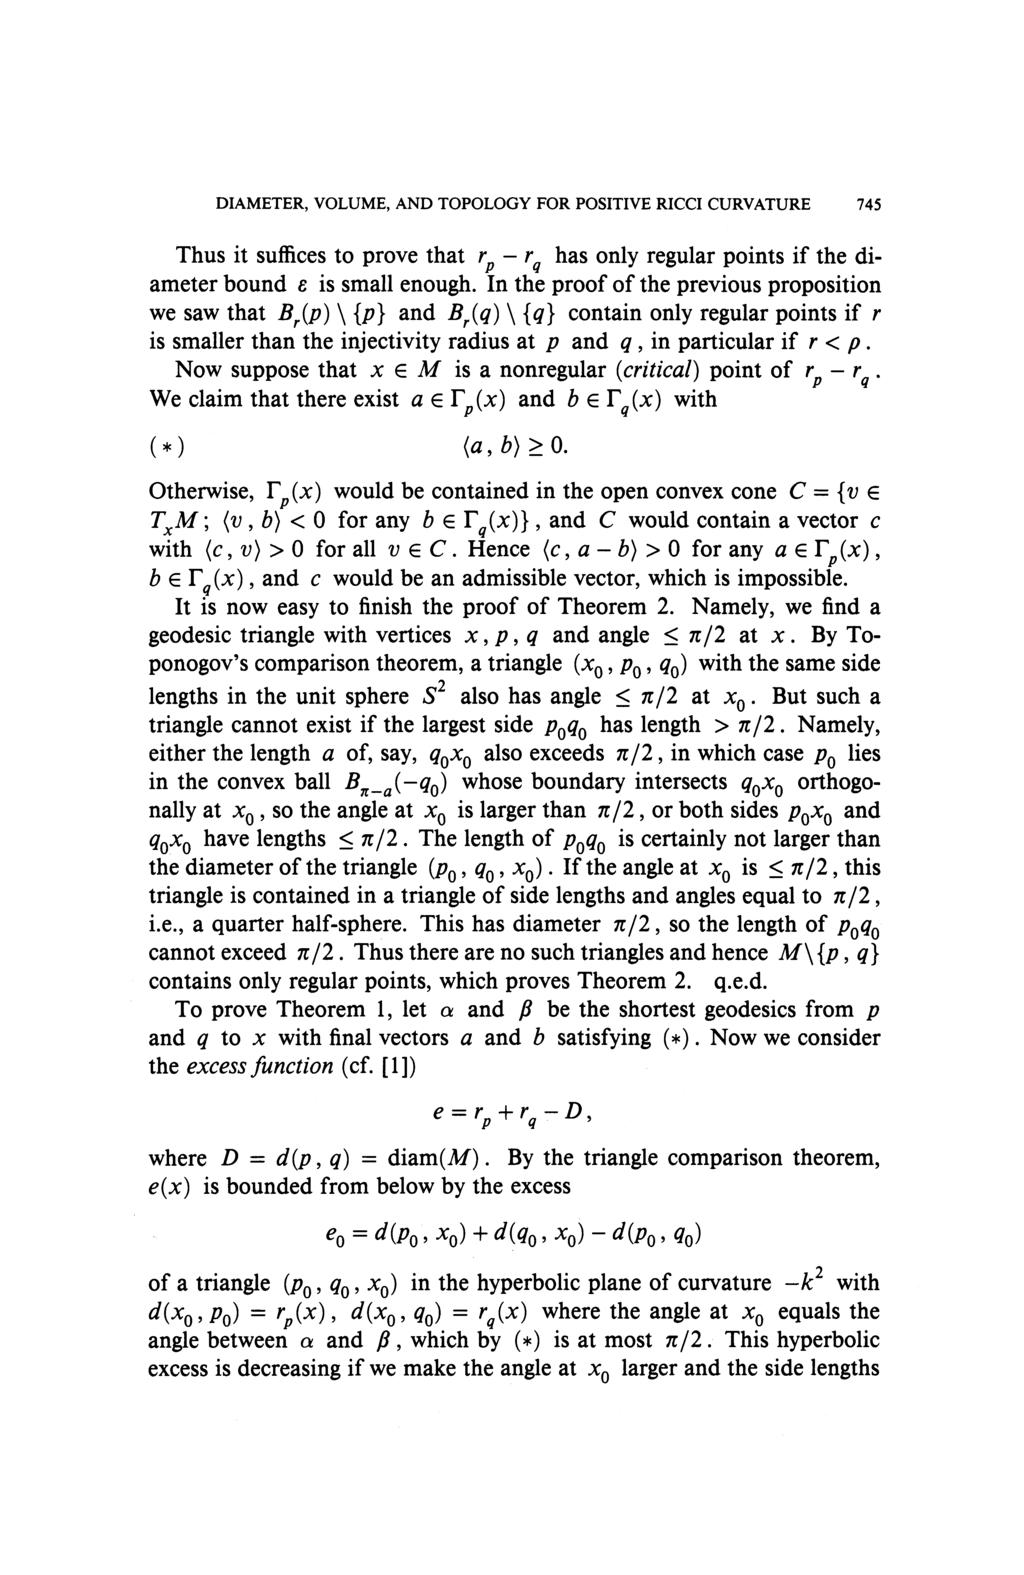 DIAMETER, VOLUME, AND TOPOLOGY FOR POSITIVE RICCI CURVATURE 745 Thus it suffices to prove that r p - r q has only regular points if the diameter bound ε is small enough.